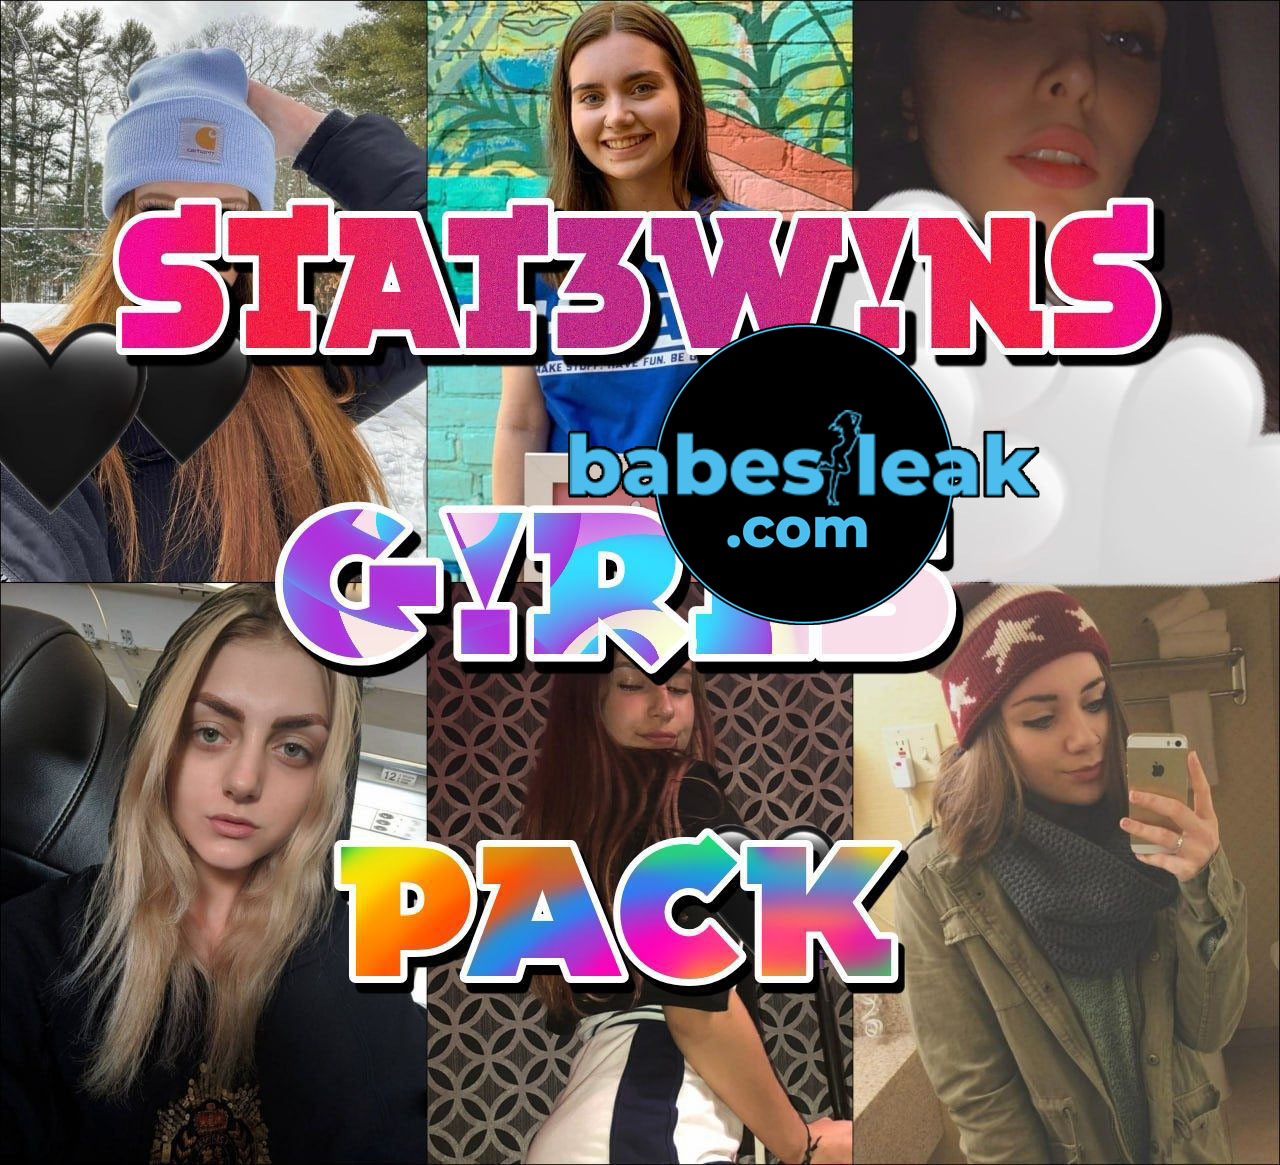 Premium 10 Statewins Girls Pack Stw080 Onlyfans Leaks Snapchat Leaks Statewins Leaks 